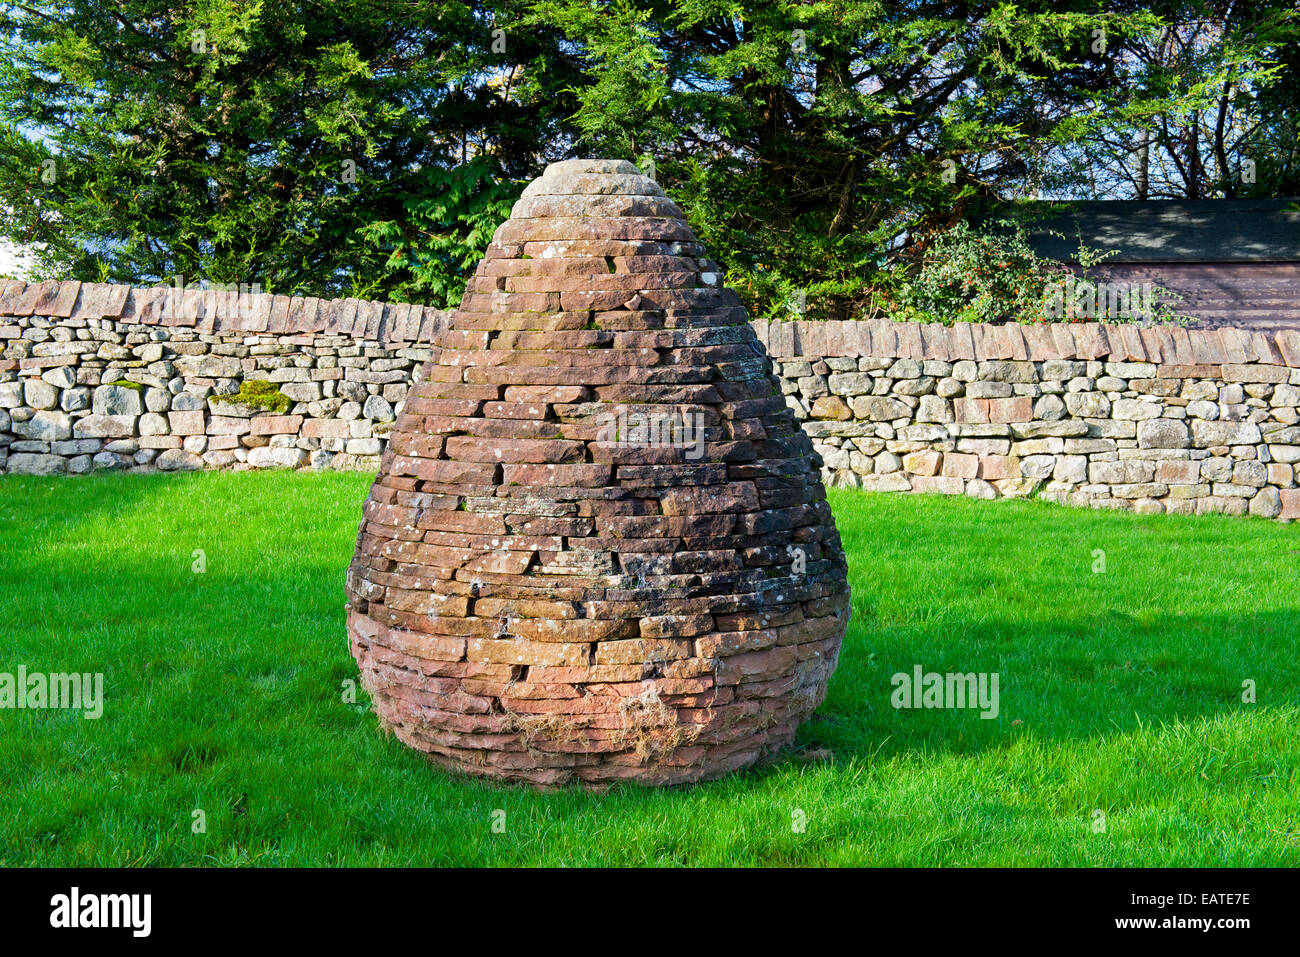 The Village Pinfold, an artwork by artist Andy Goldsworthy, in the village of Bolton, Cumbria, England UK Stock Photo